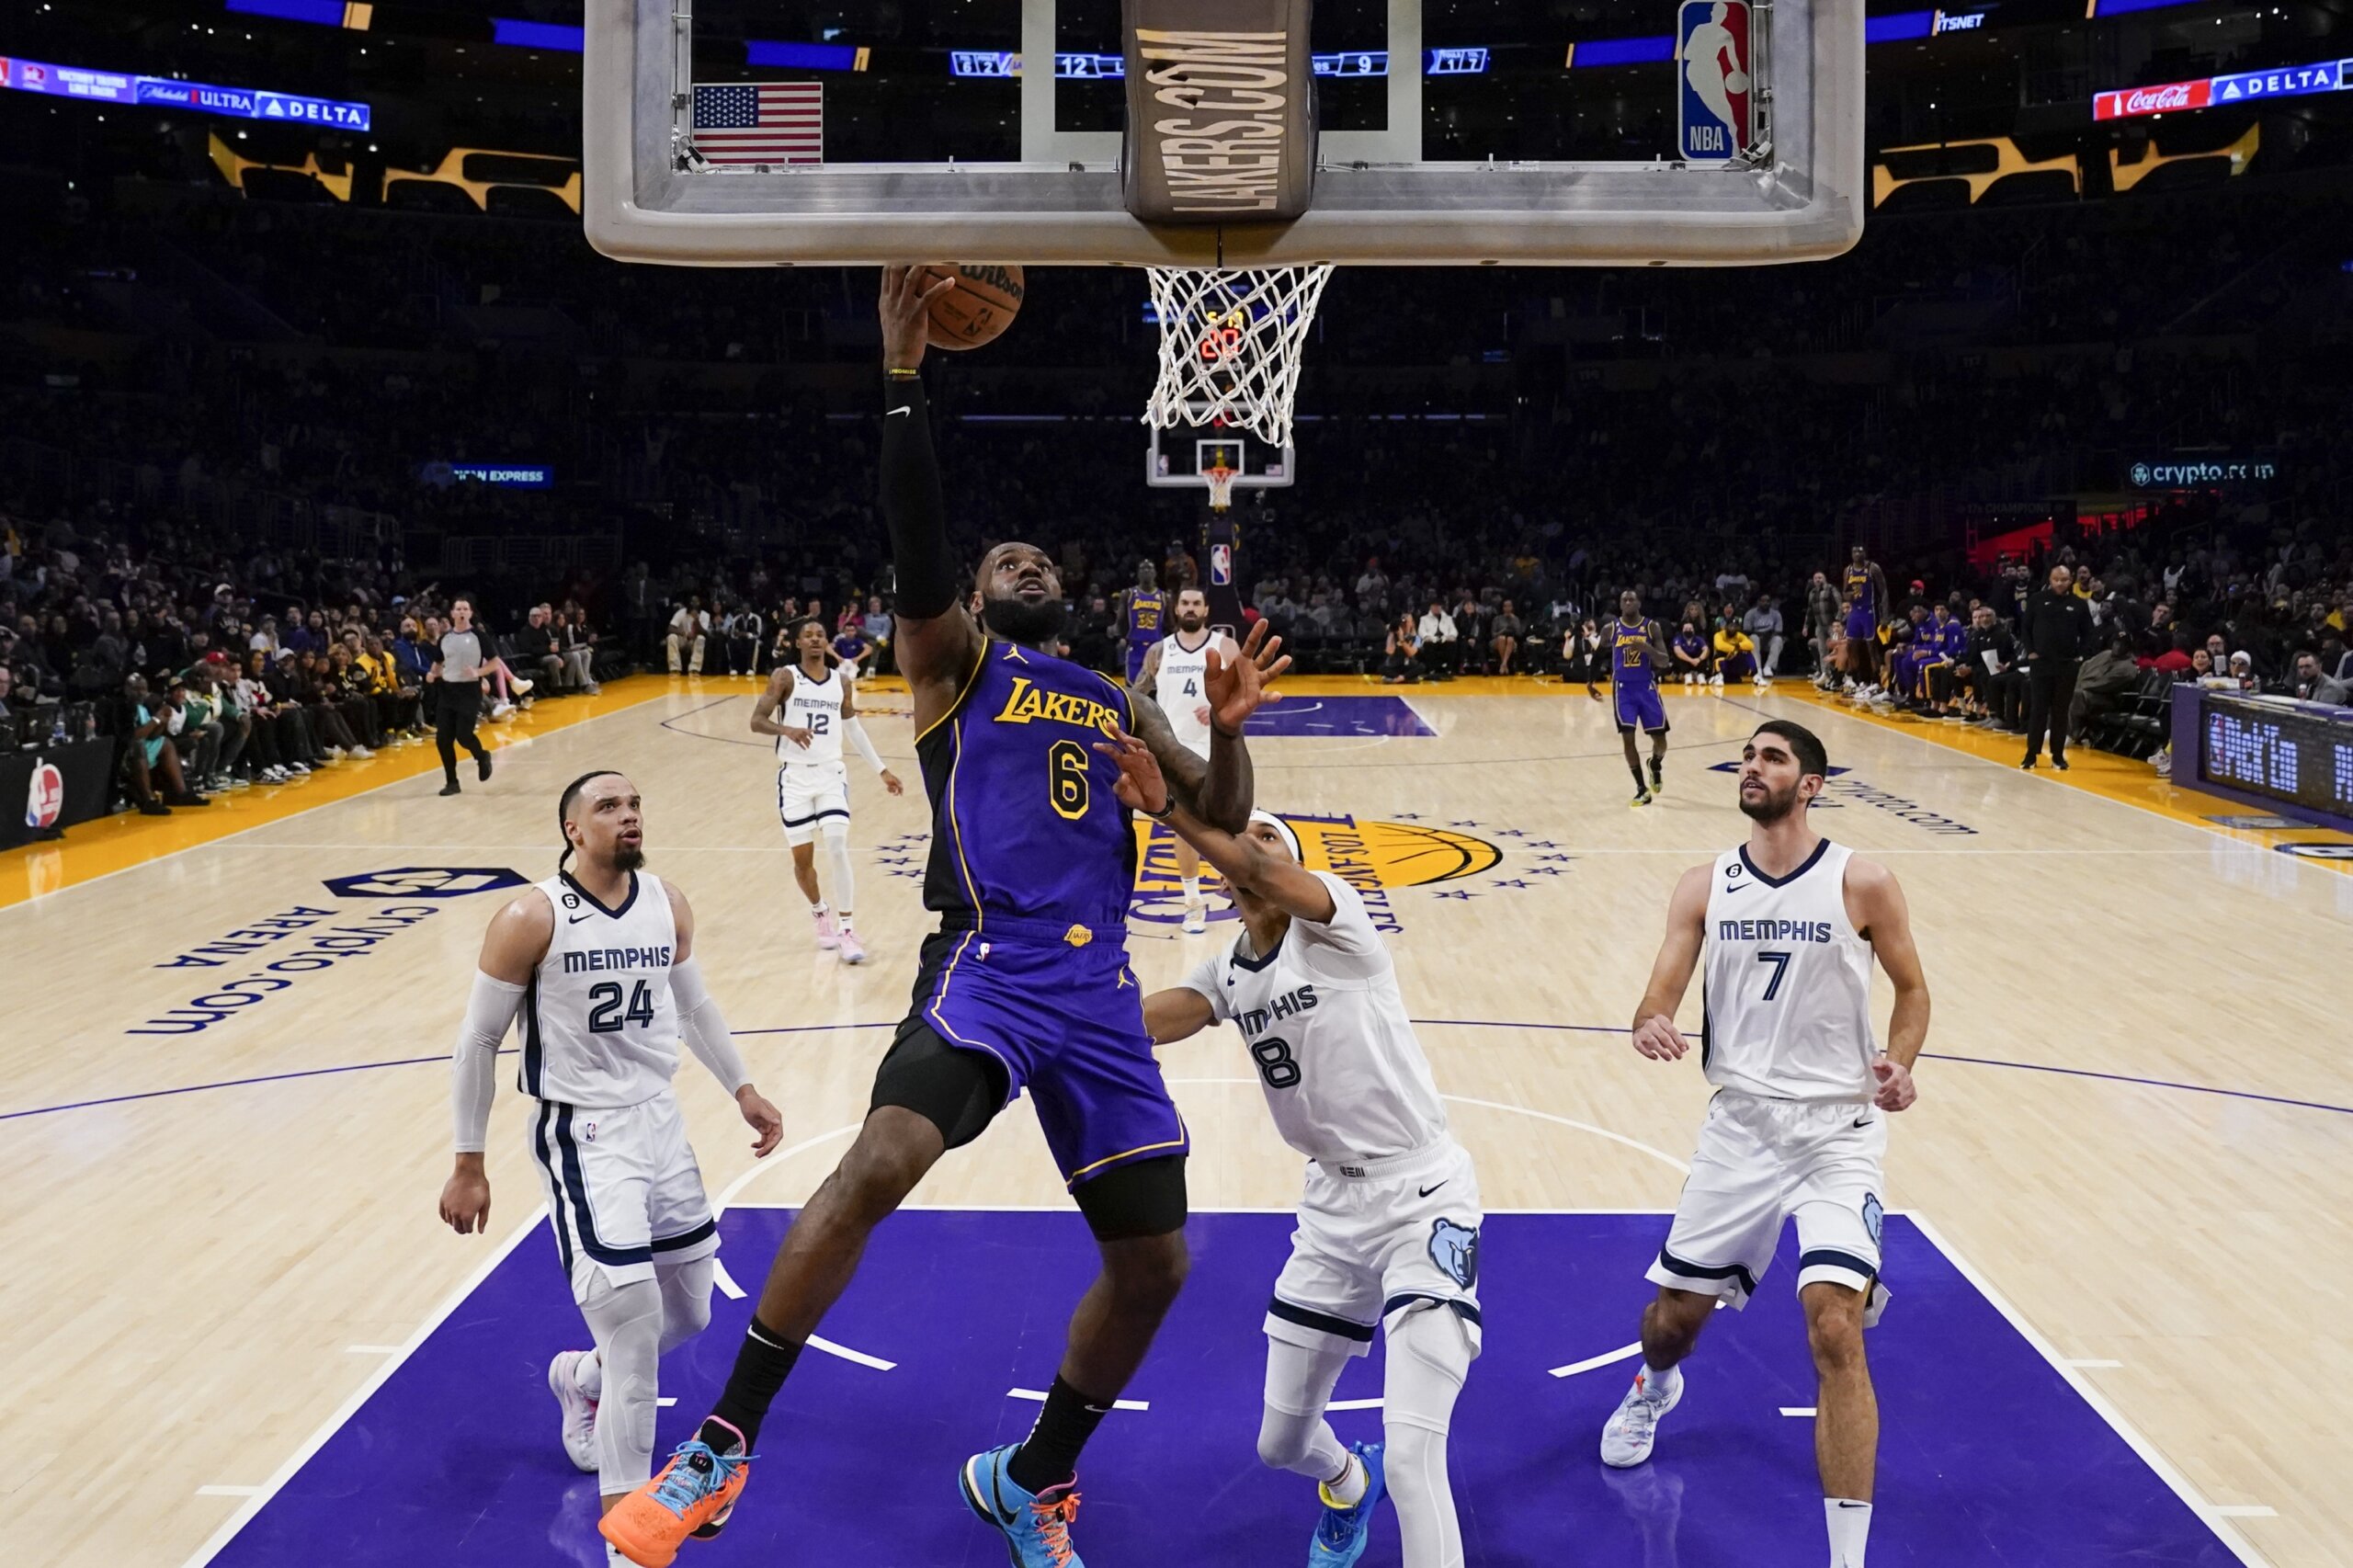 Lakers rally to snap Grizzlies’ winning streak at 11 games